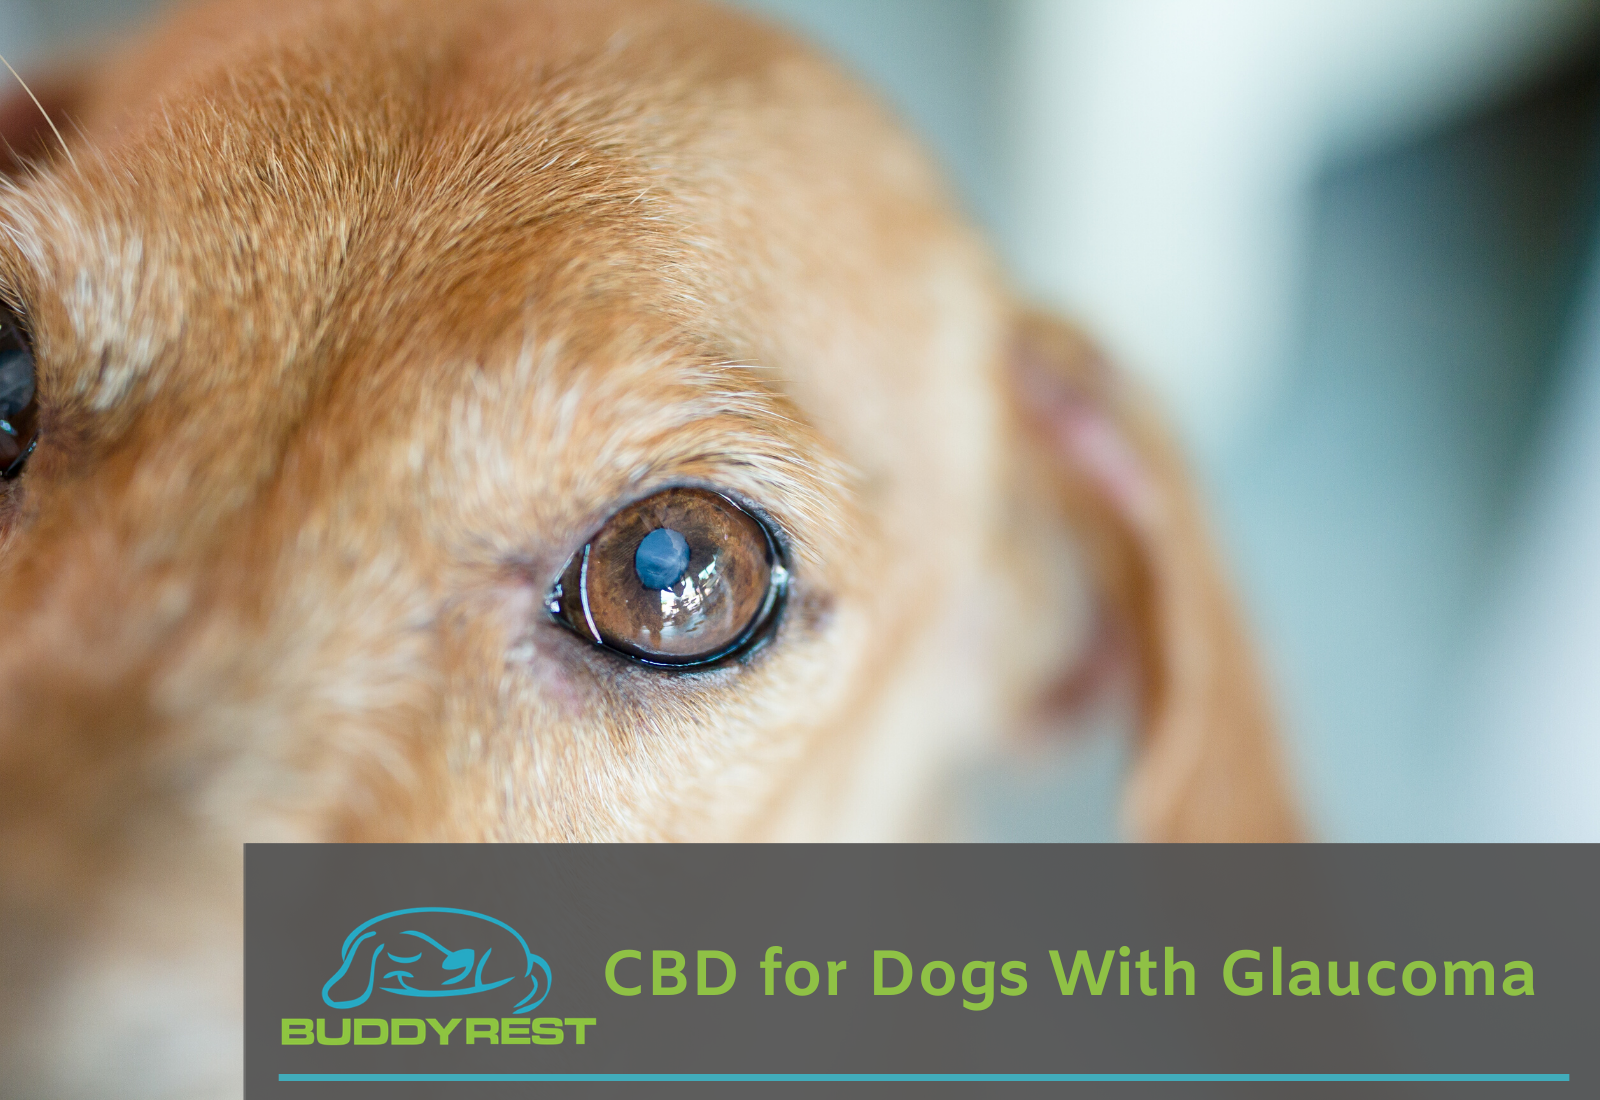 CBD for Dogs with Glaucoma